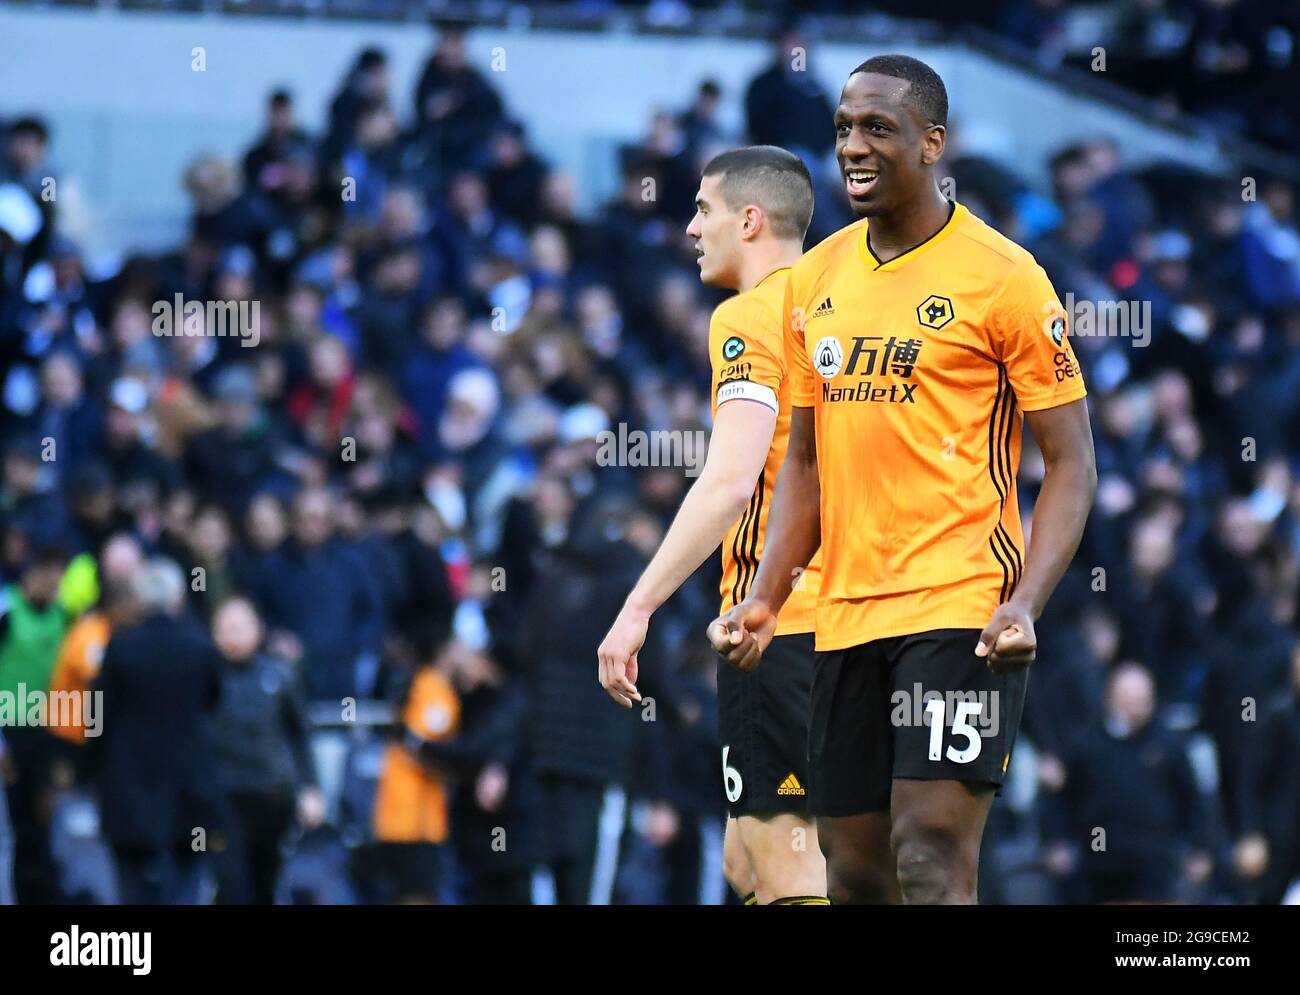 LONDON, ENGLAND - MArch 1, 2020: Willy Boly of Wolverhampton pictured during the 2020/21 Premier League game between Tottenham Hotspur FC and Wolverhampton FC at Tottenham Hotspur Stadium. Stock Photo